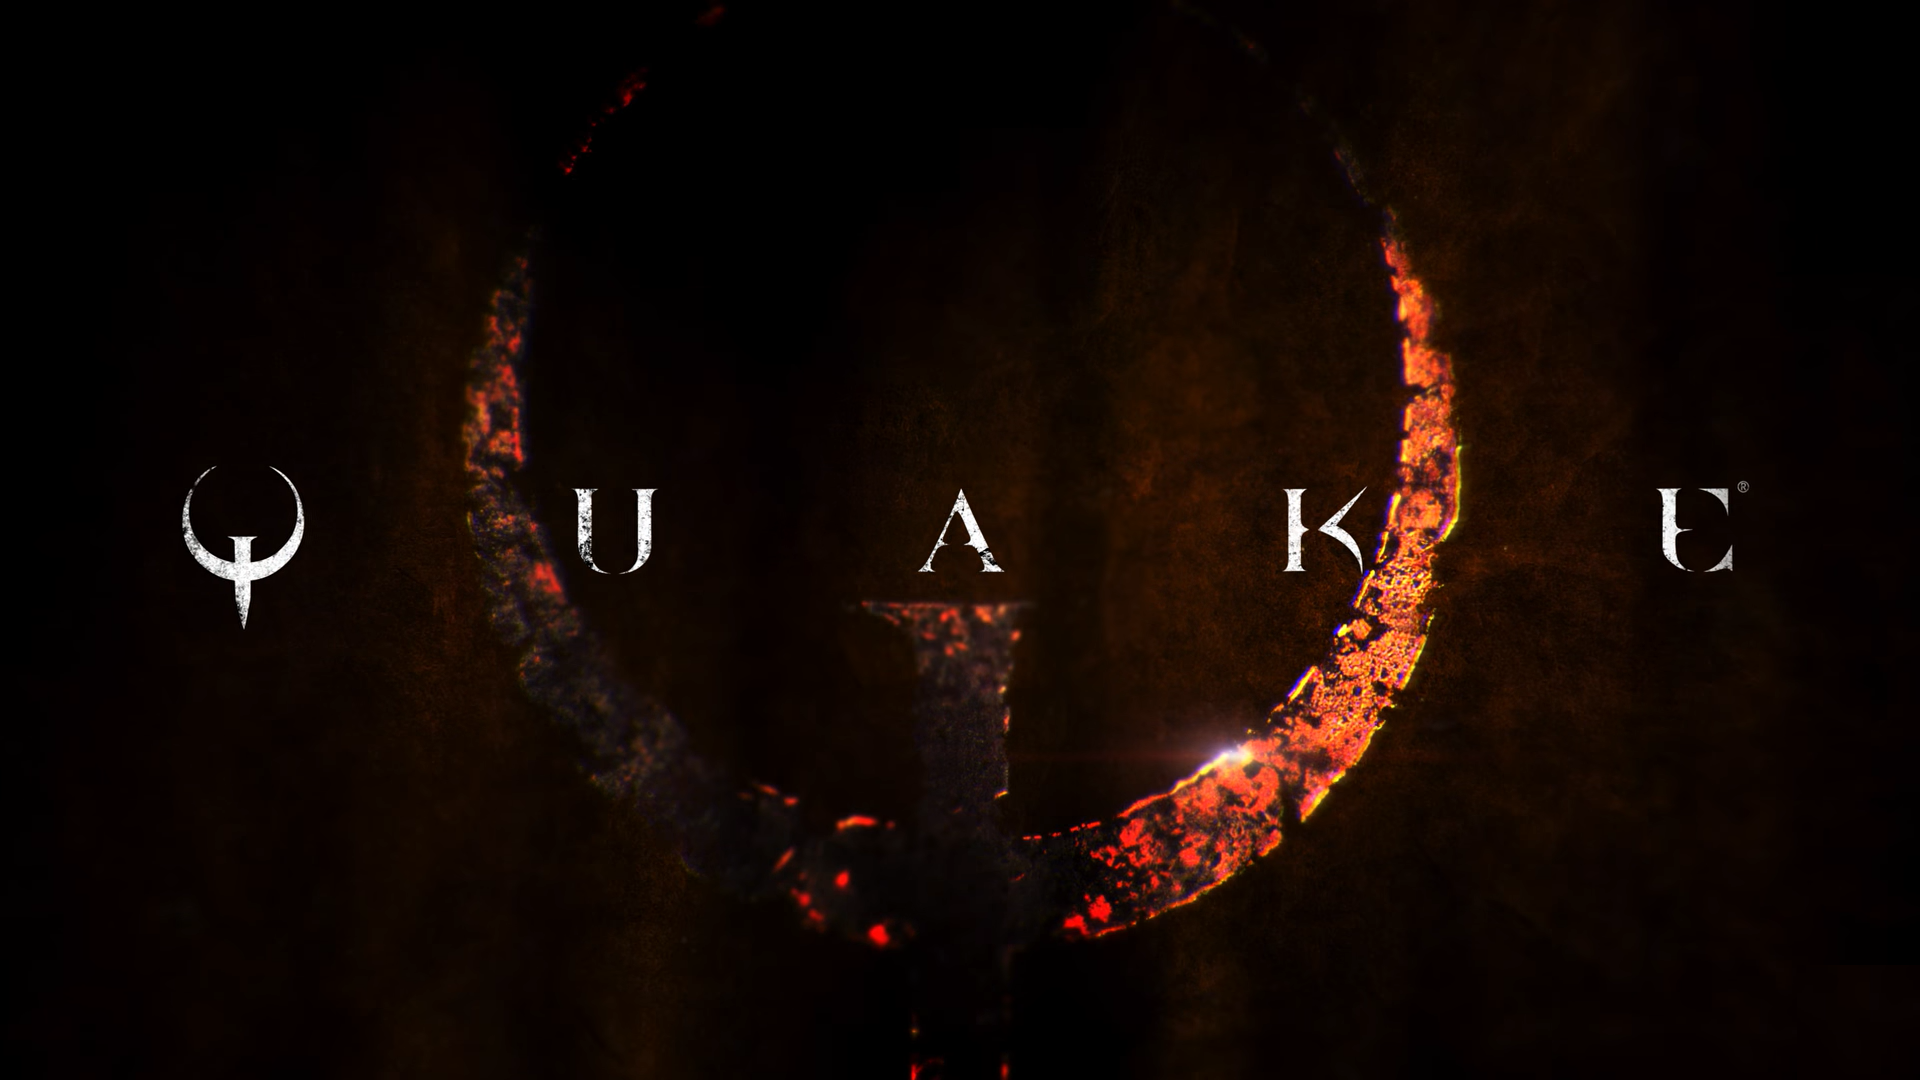 Classic Quake games are now available on Game Pass